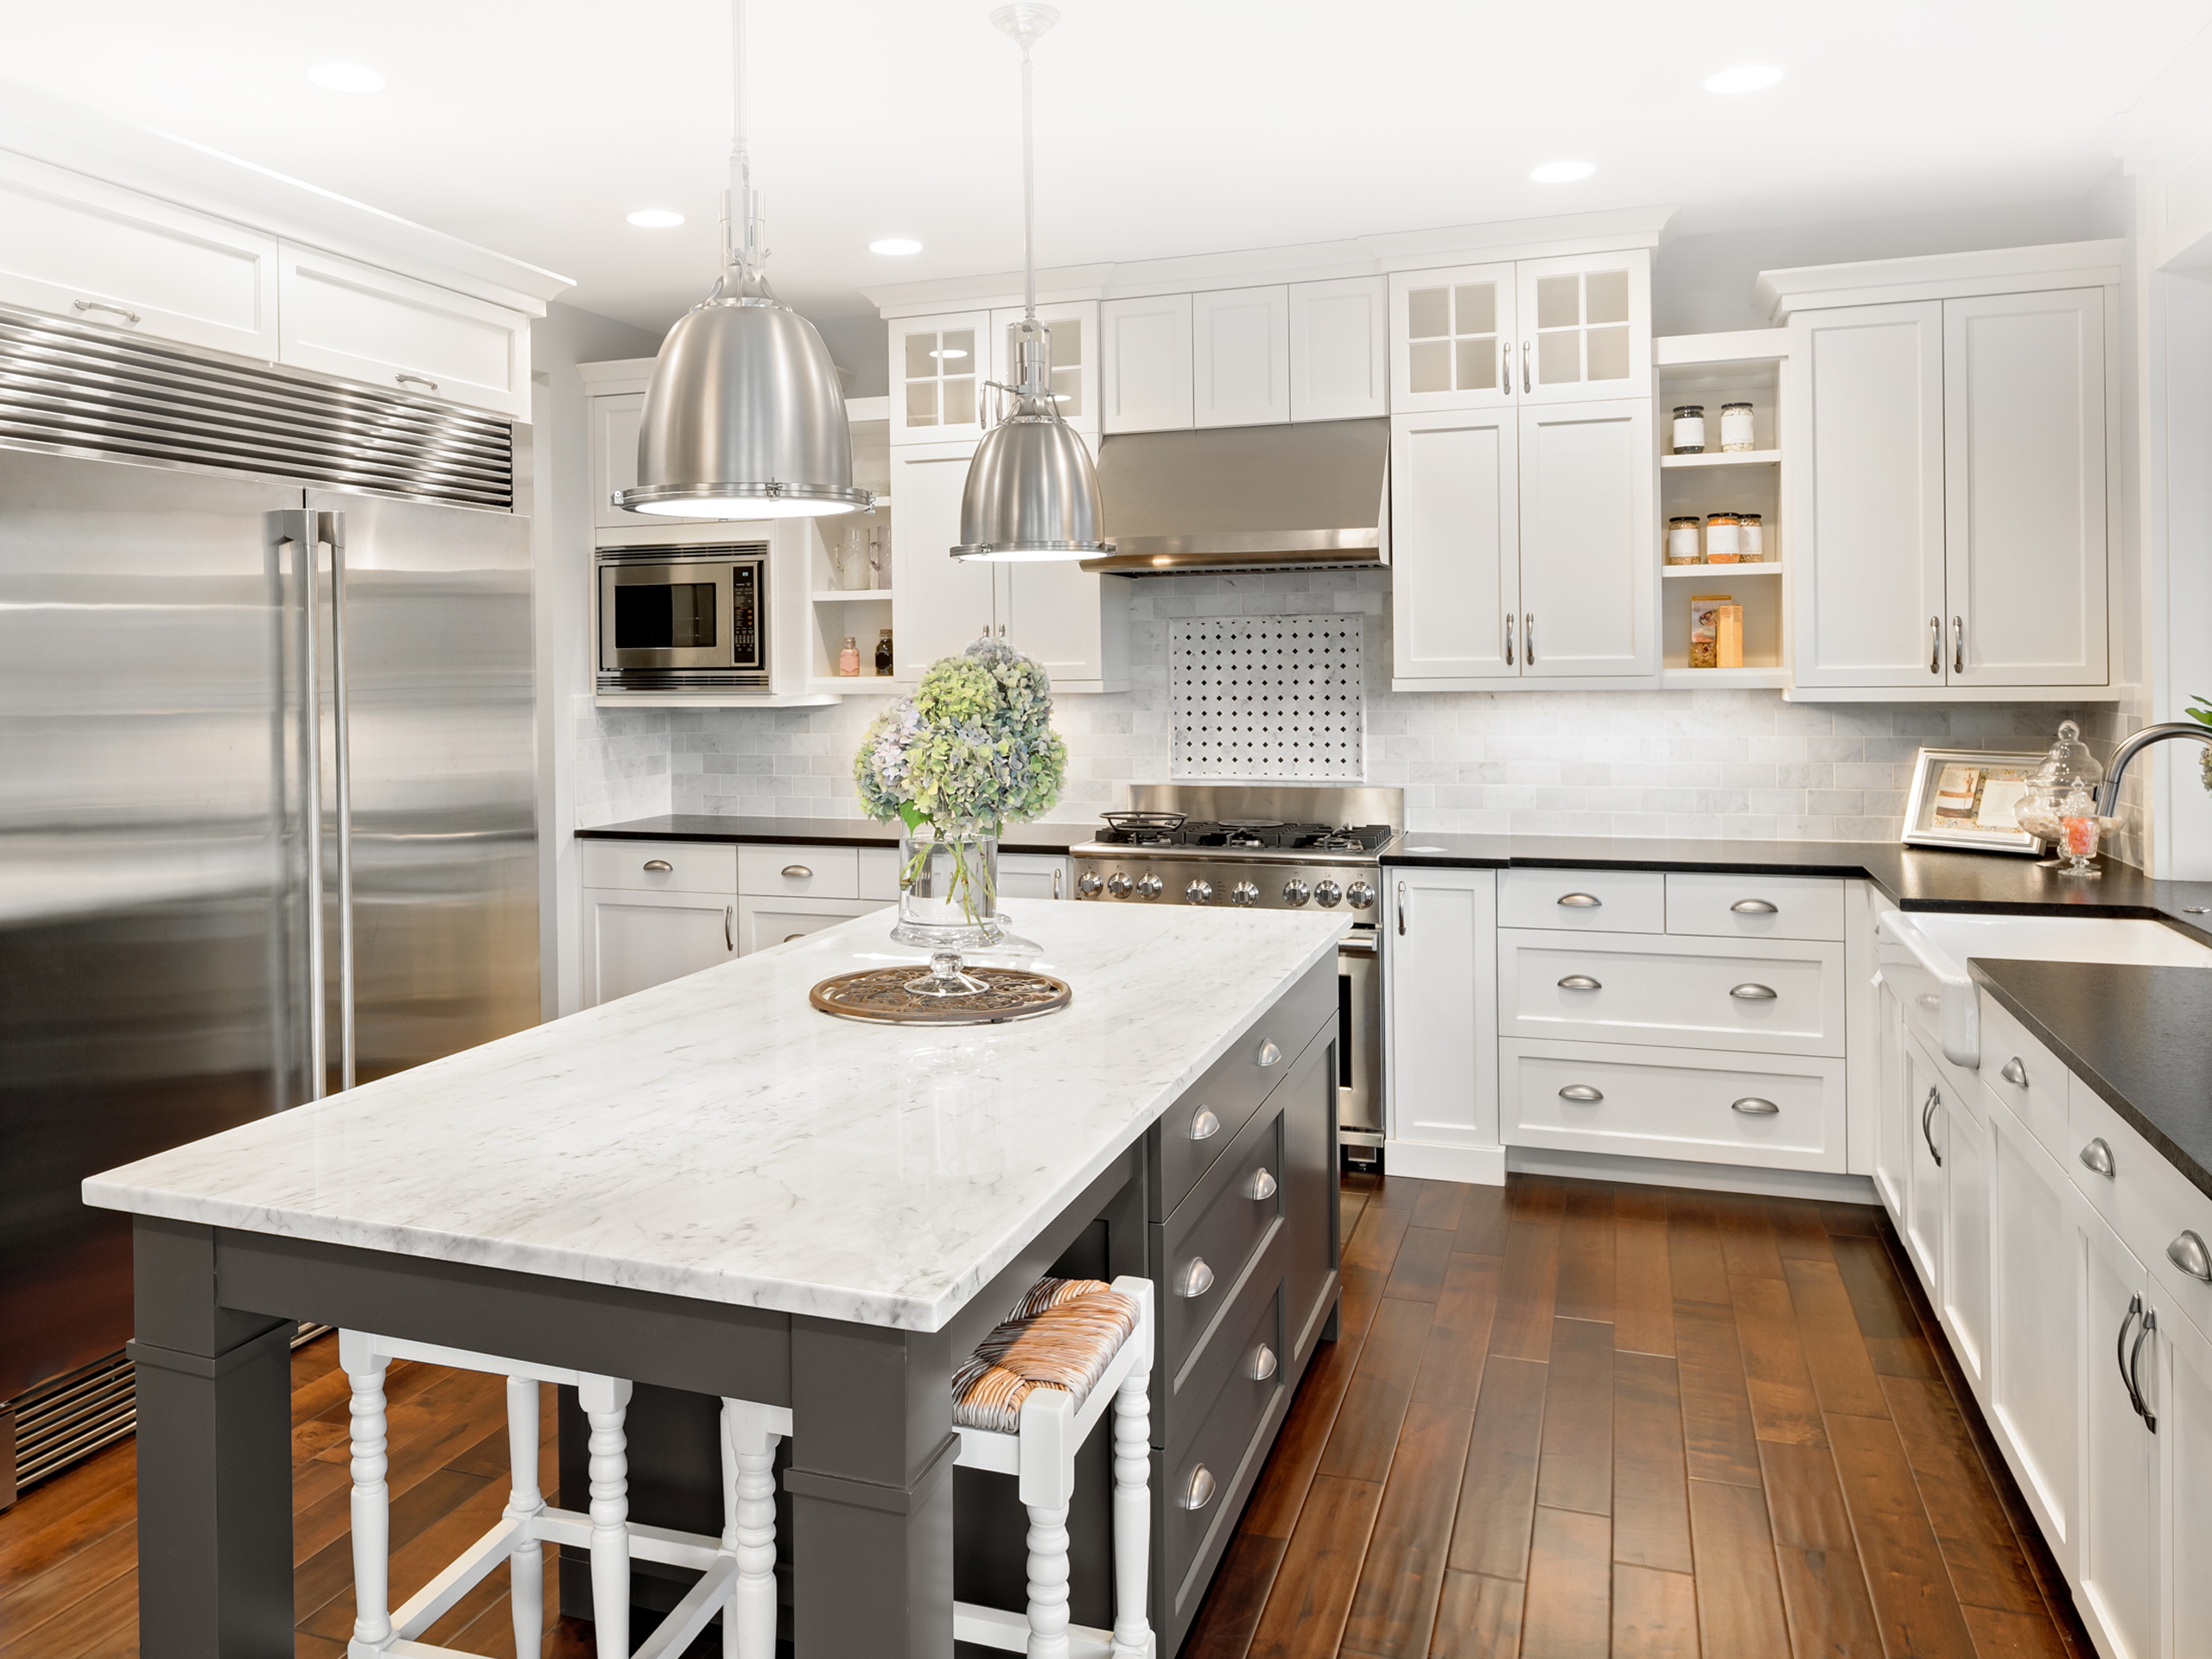 Putnam Handyman Services Kitchen Remodeling and Kitchen Repairs